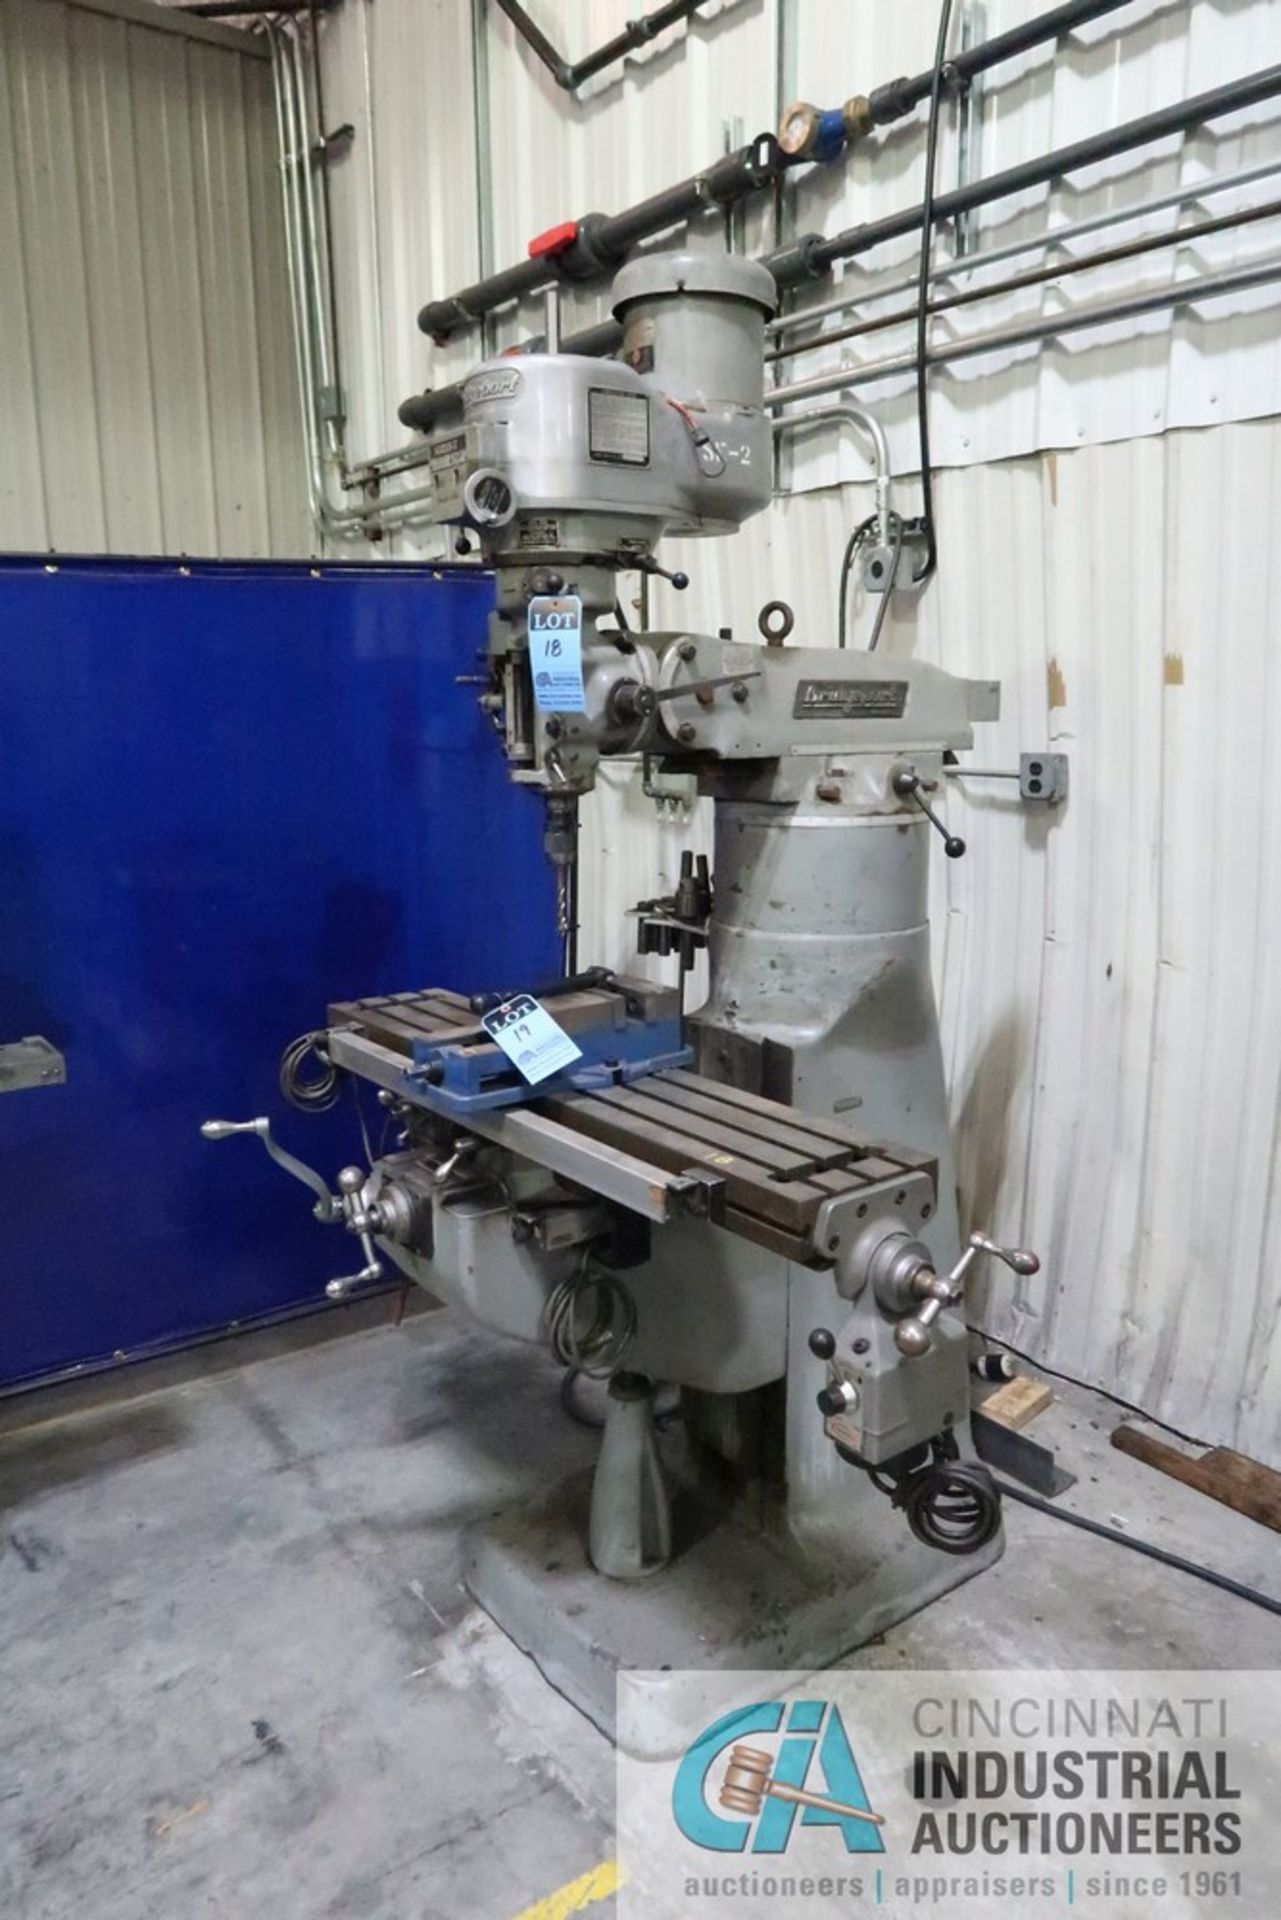 2 HP BRIDGEPORT VERTICAL MILL; S/N 23672, 48" X 9" POWER TABLE, SPINDLE SPEED 60-4,2000 RPM